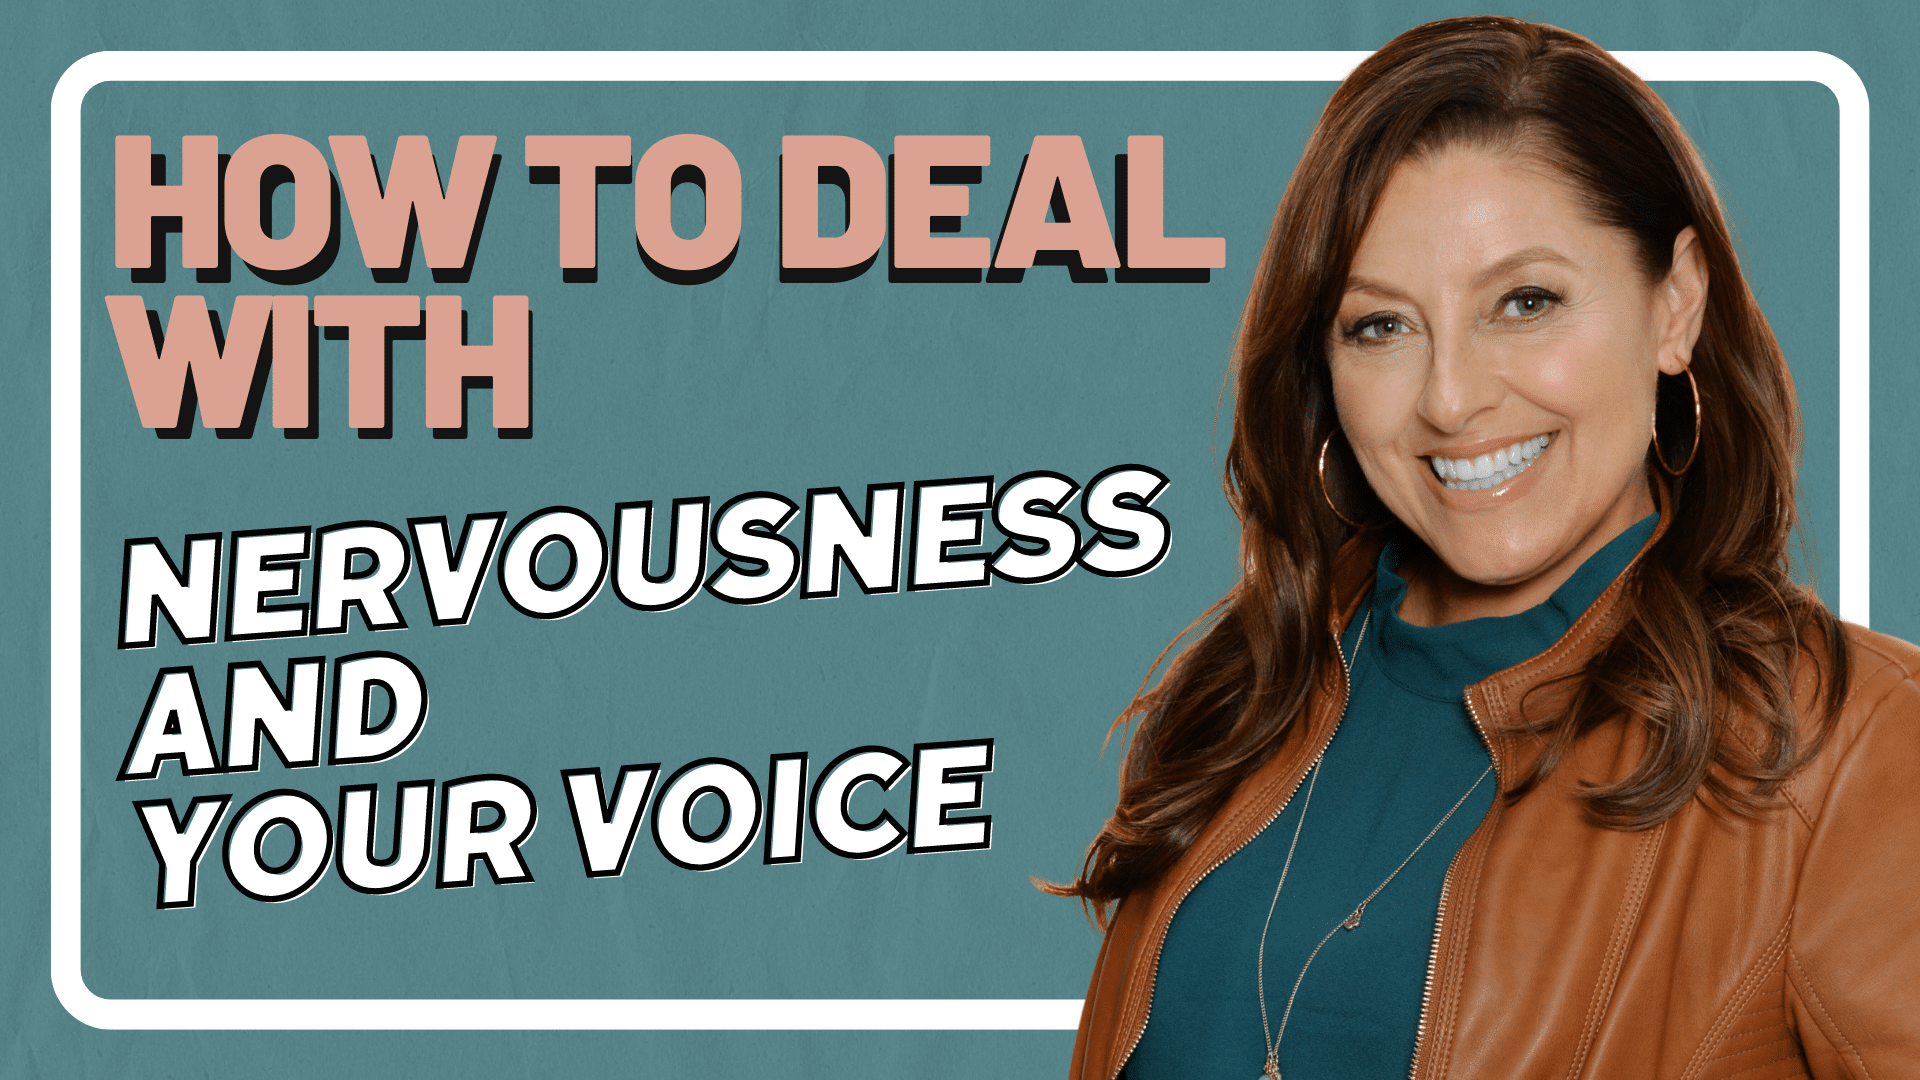 How to Deal with Nervousness and Your Voice